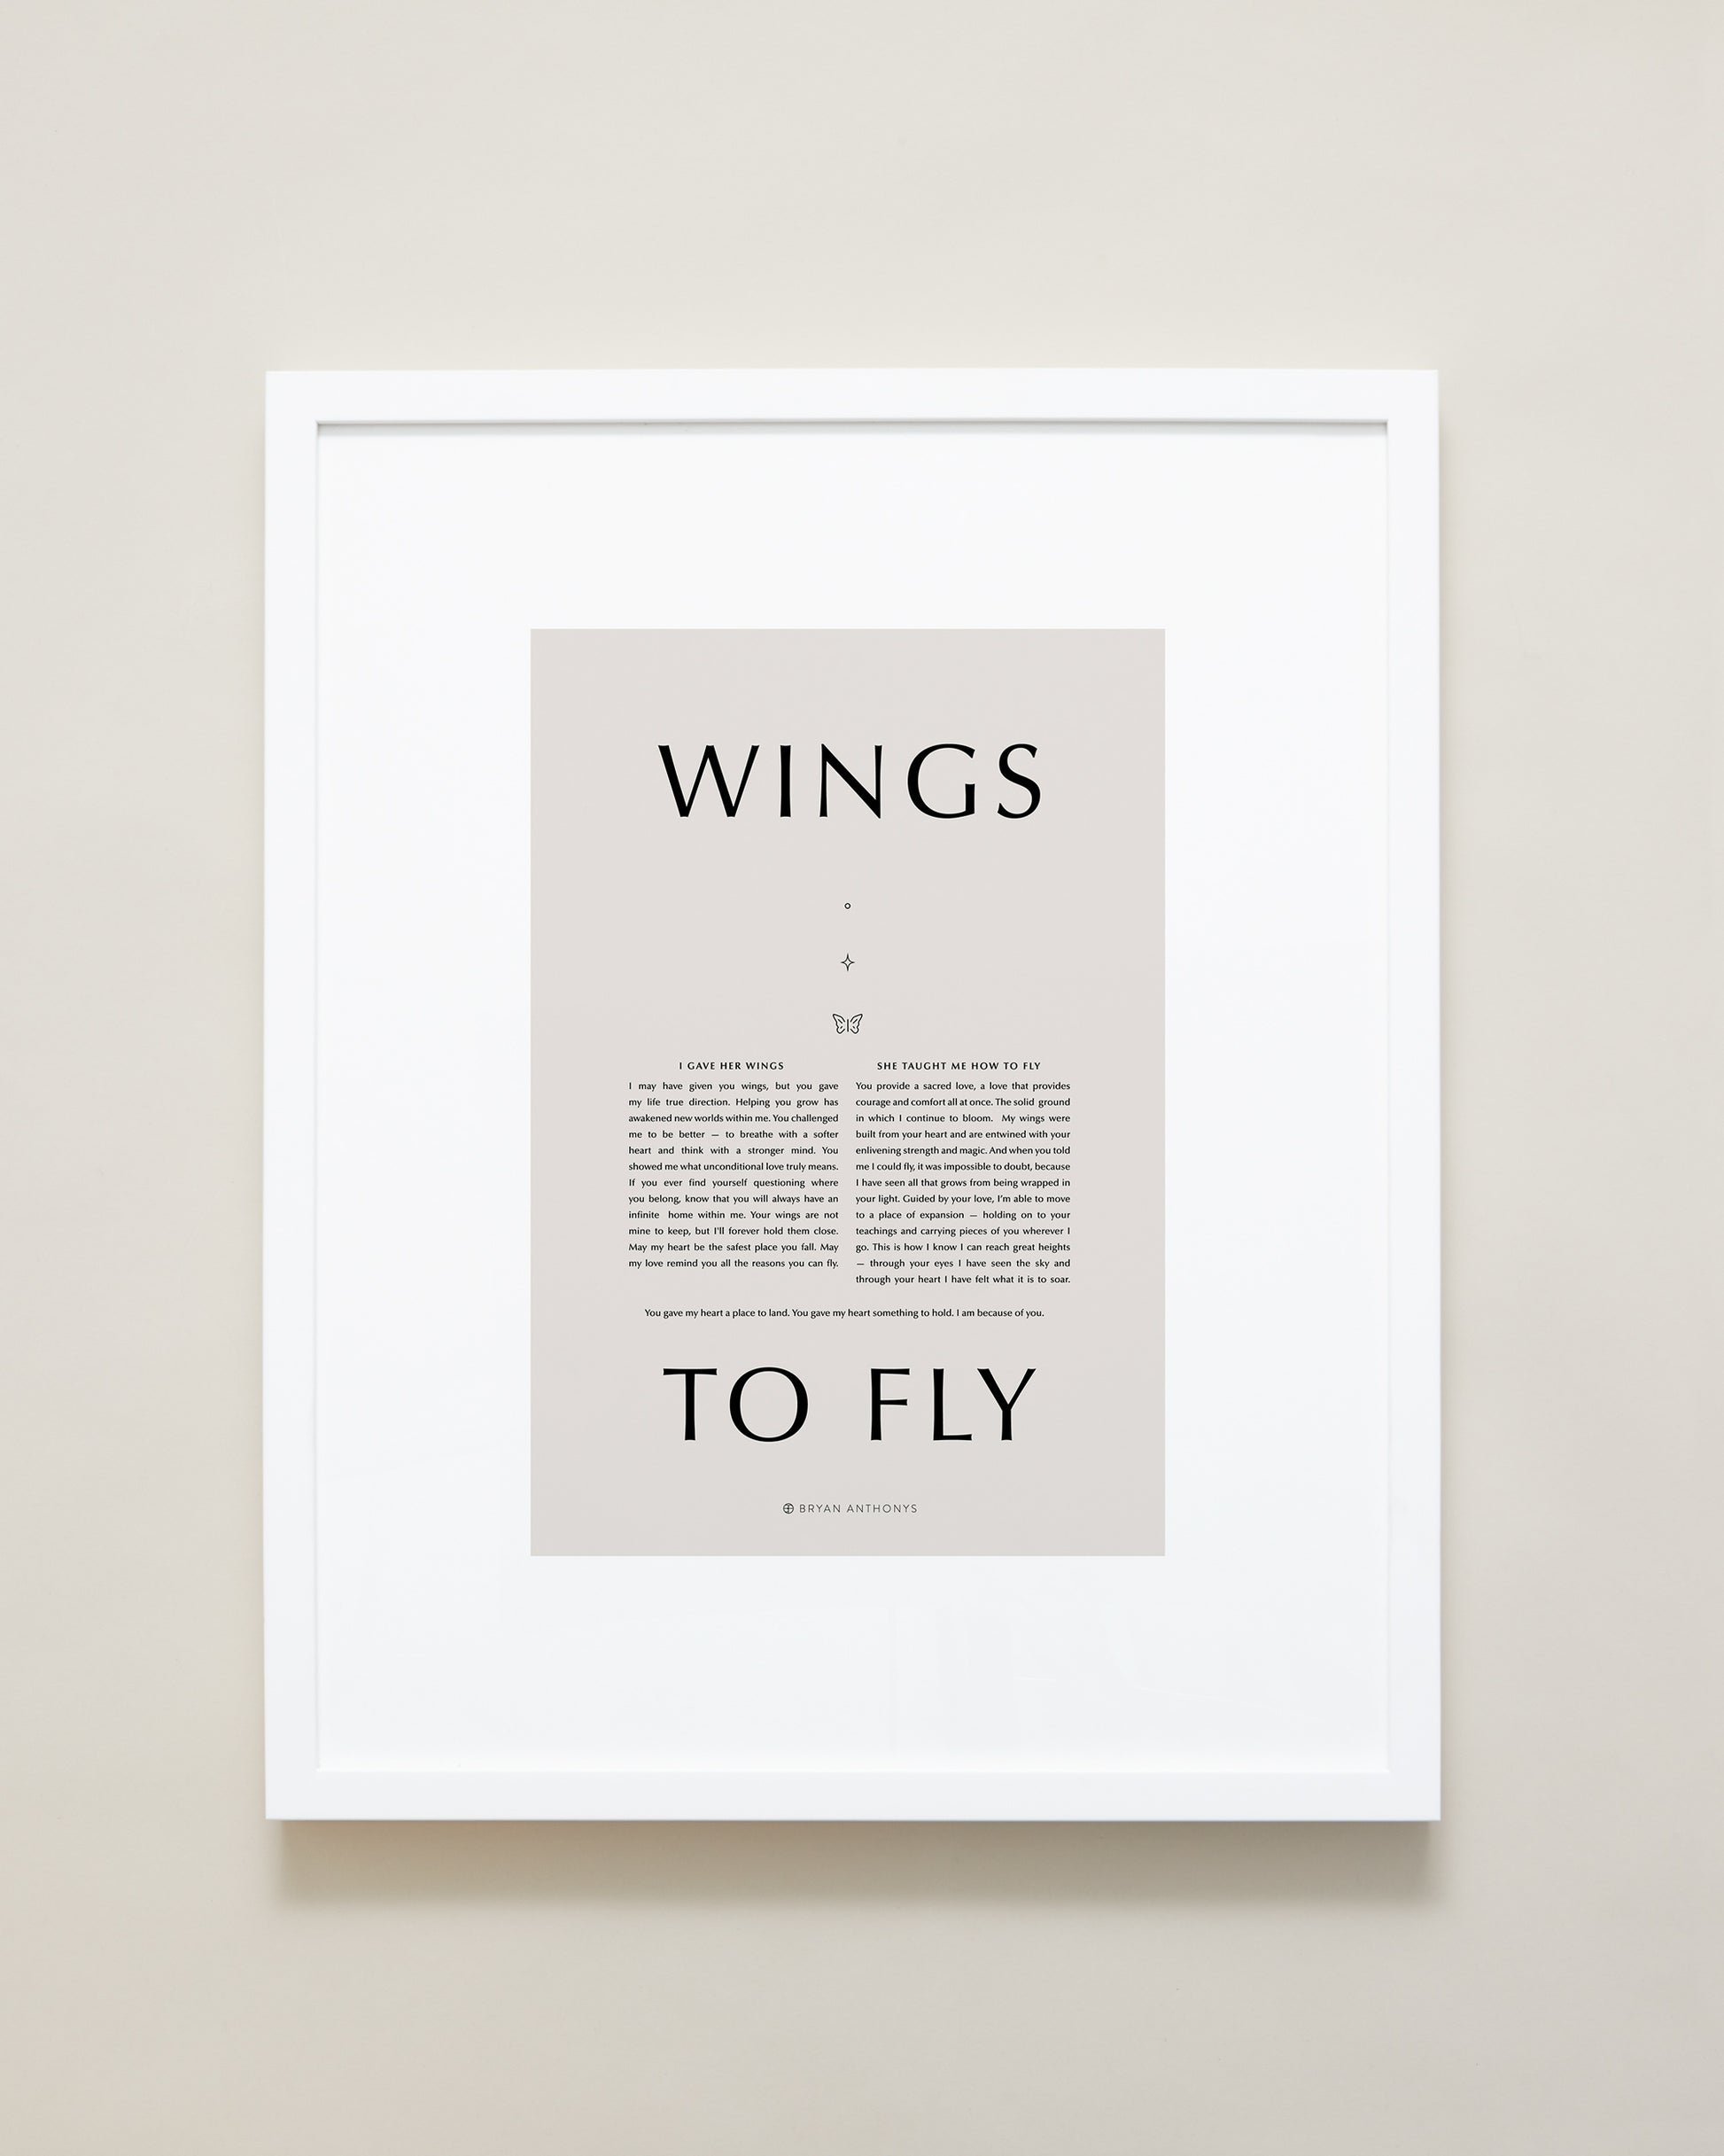 Bryan Anthonys Home Decor Wings To Fly Framed Print 16x20 White Frame with Tan